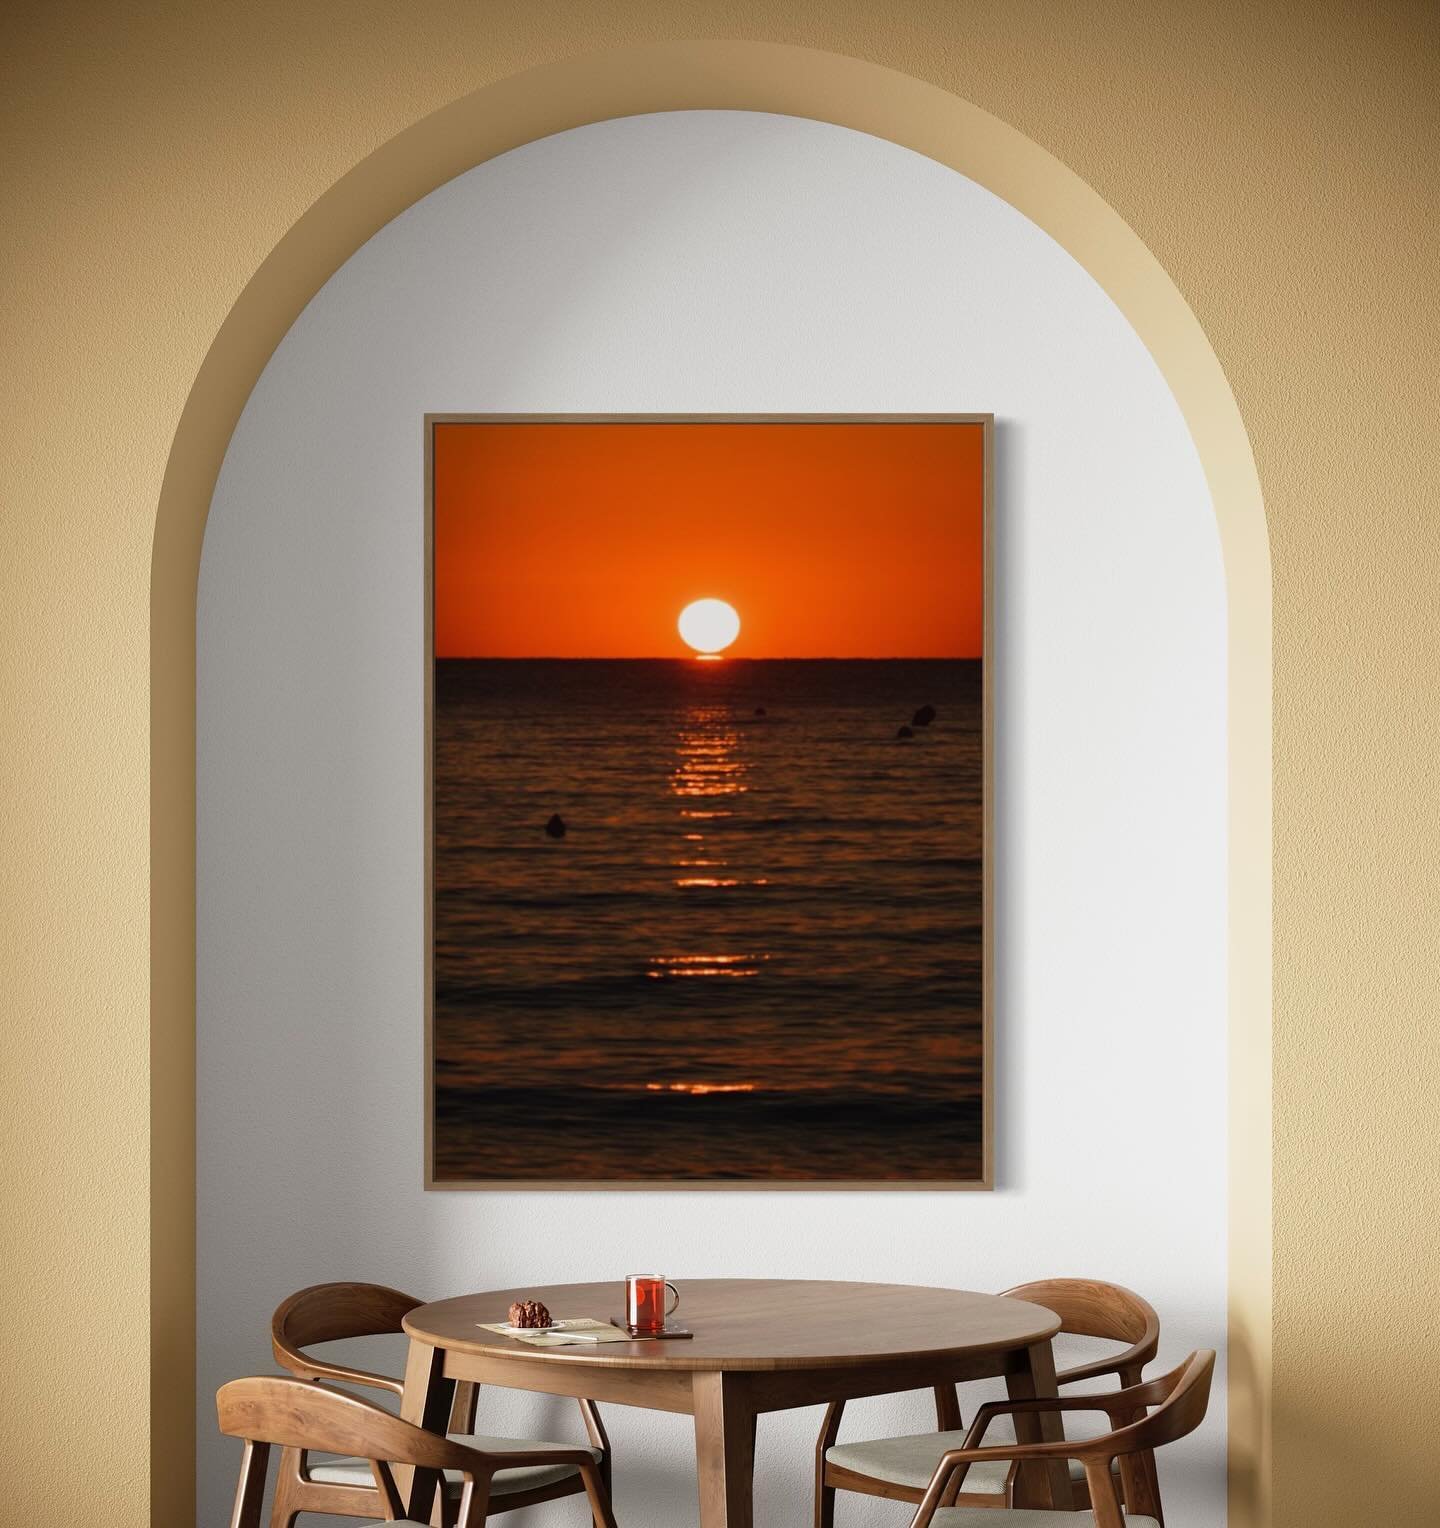 Sunrise.

Yours if you want it! Available in all of the usual sizes. Worldwide shipping is available🔥

#sun #sunset #sunrise #sainttropez #sttropez #club55 #leclub55 #beach #beachlife #art #artwork #summer #home #decor #design #lifestyle #photograph